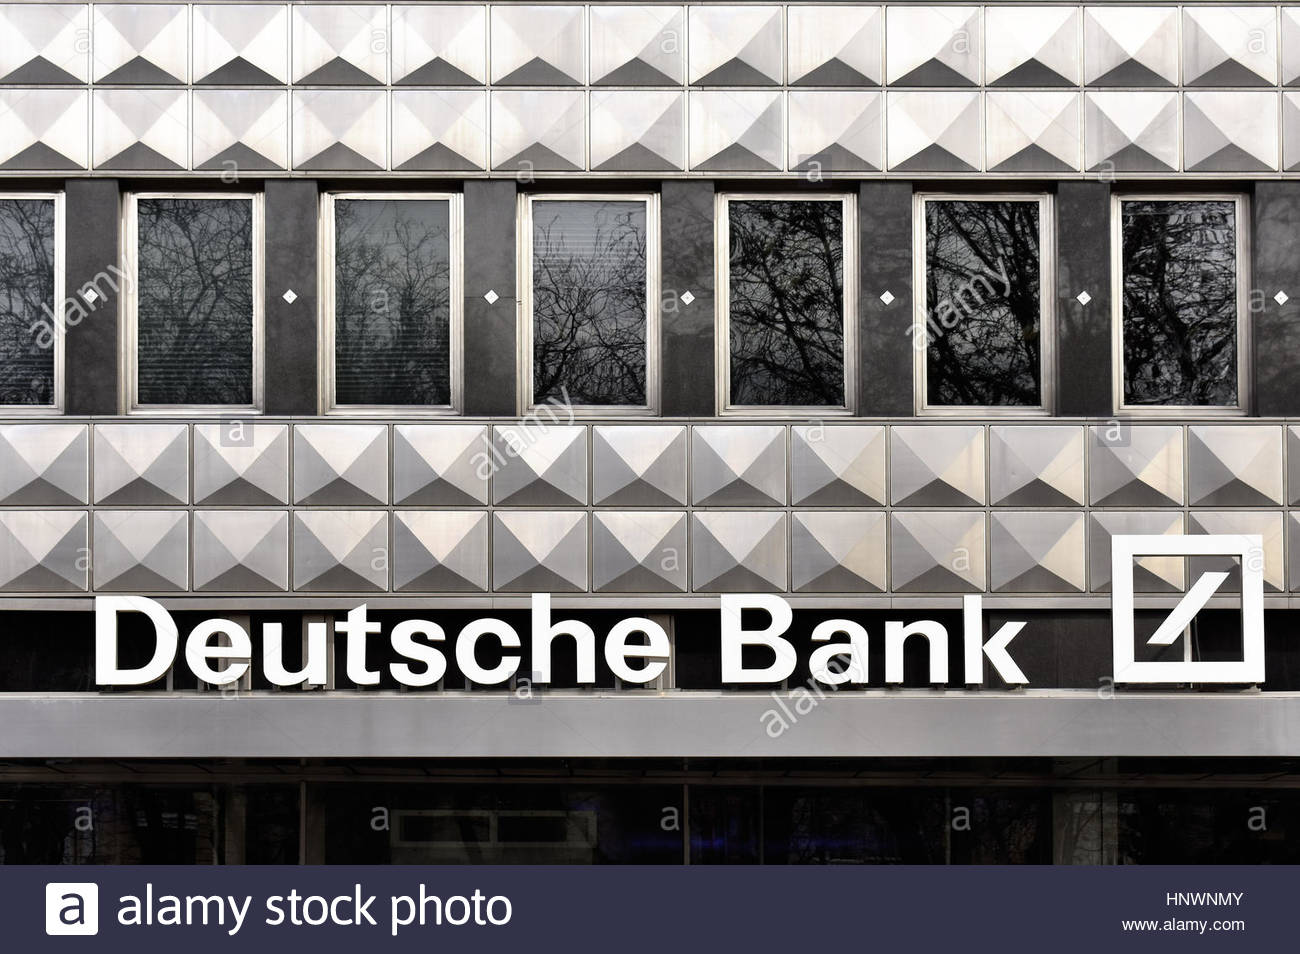 Deutschebanklogo High Resolution Stock Photography And Images Alamy